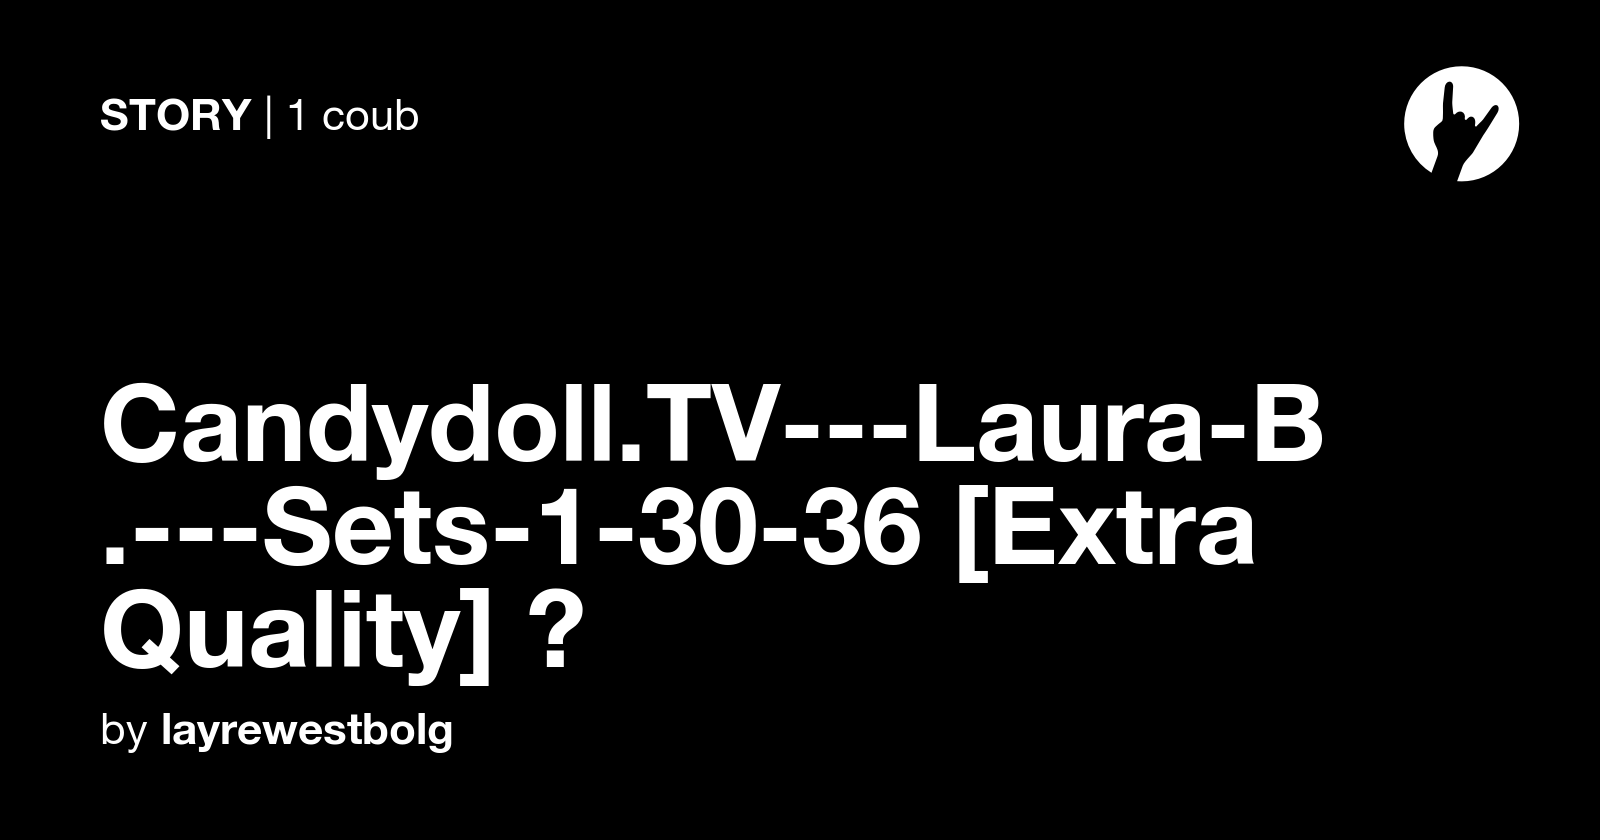 Candydoll.TV---Laura-B.---Sets-1-30-36 [Extra Quality] 💕 - Coub 